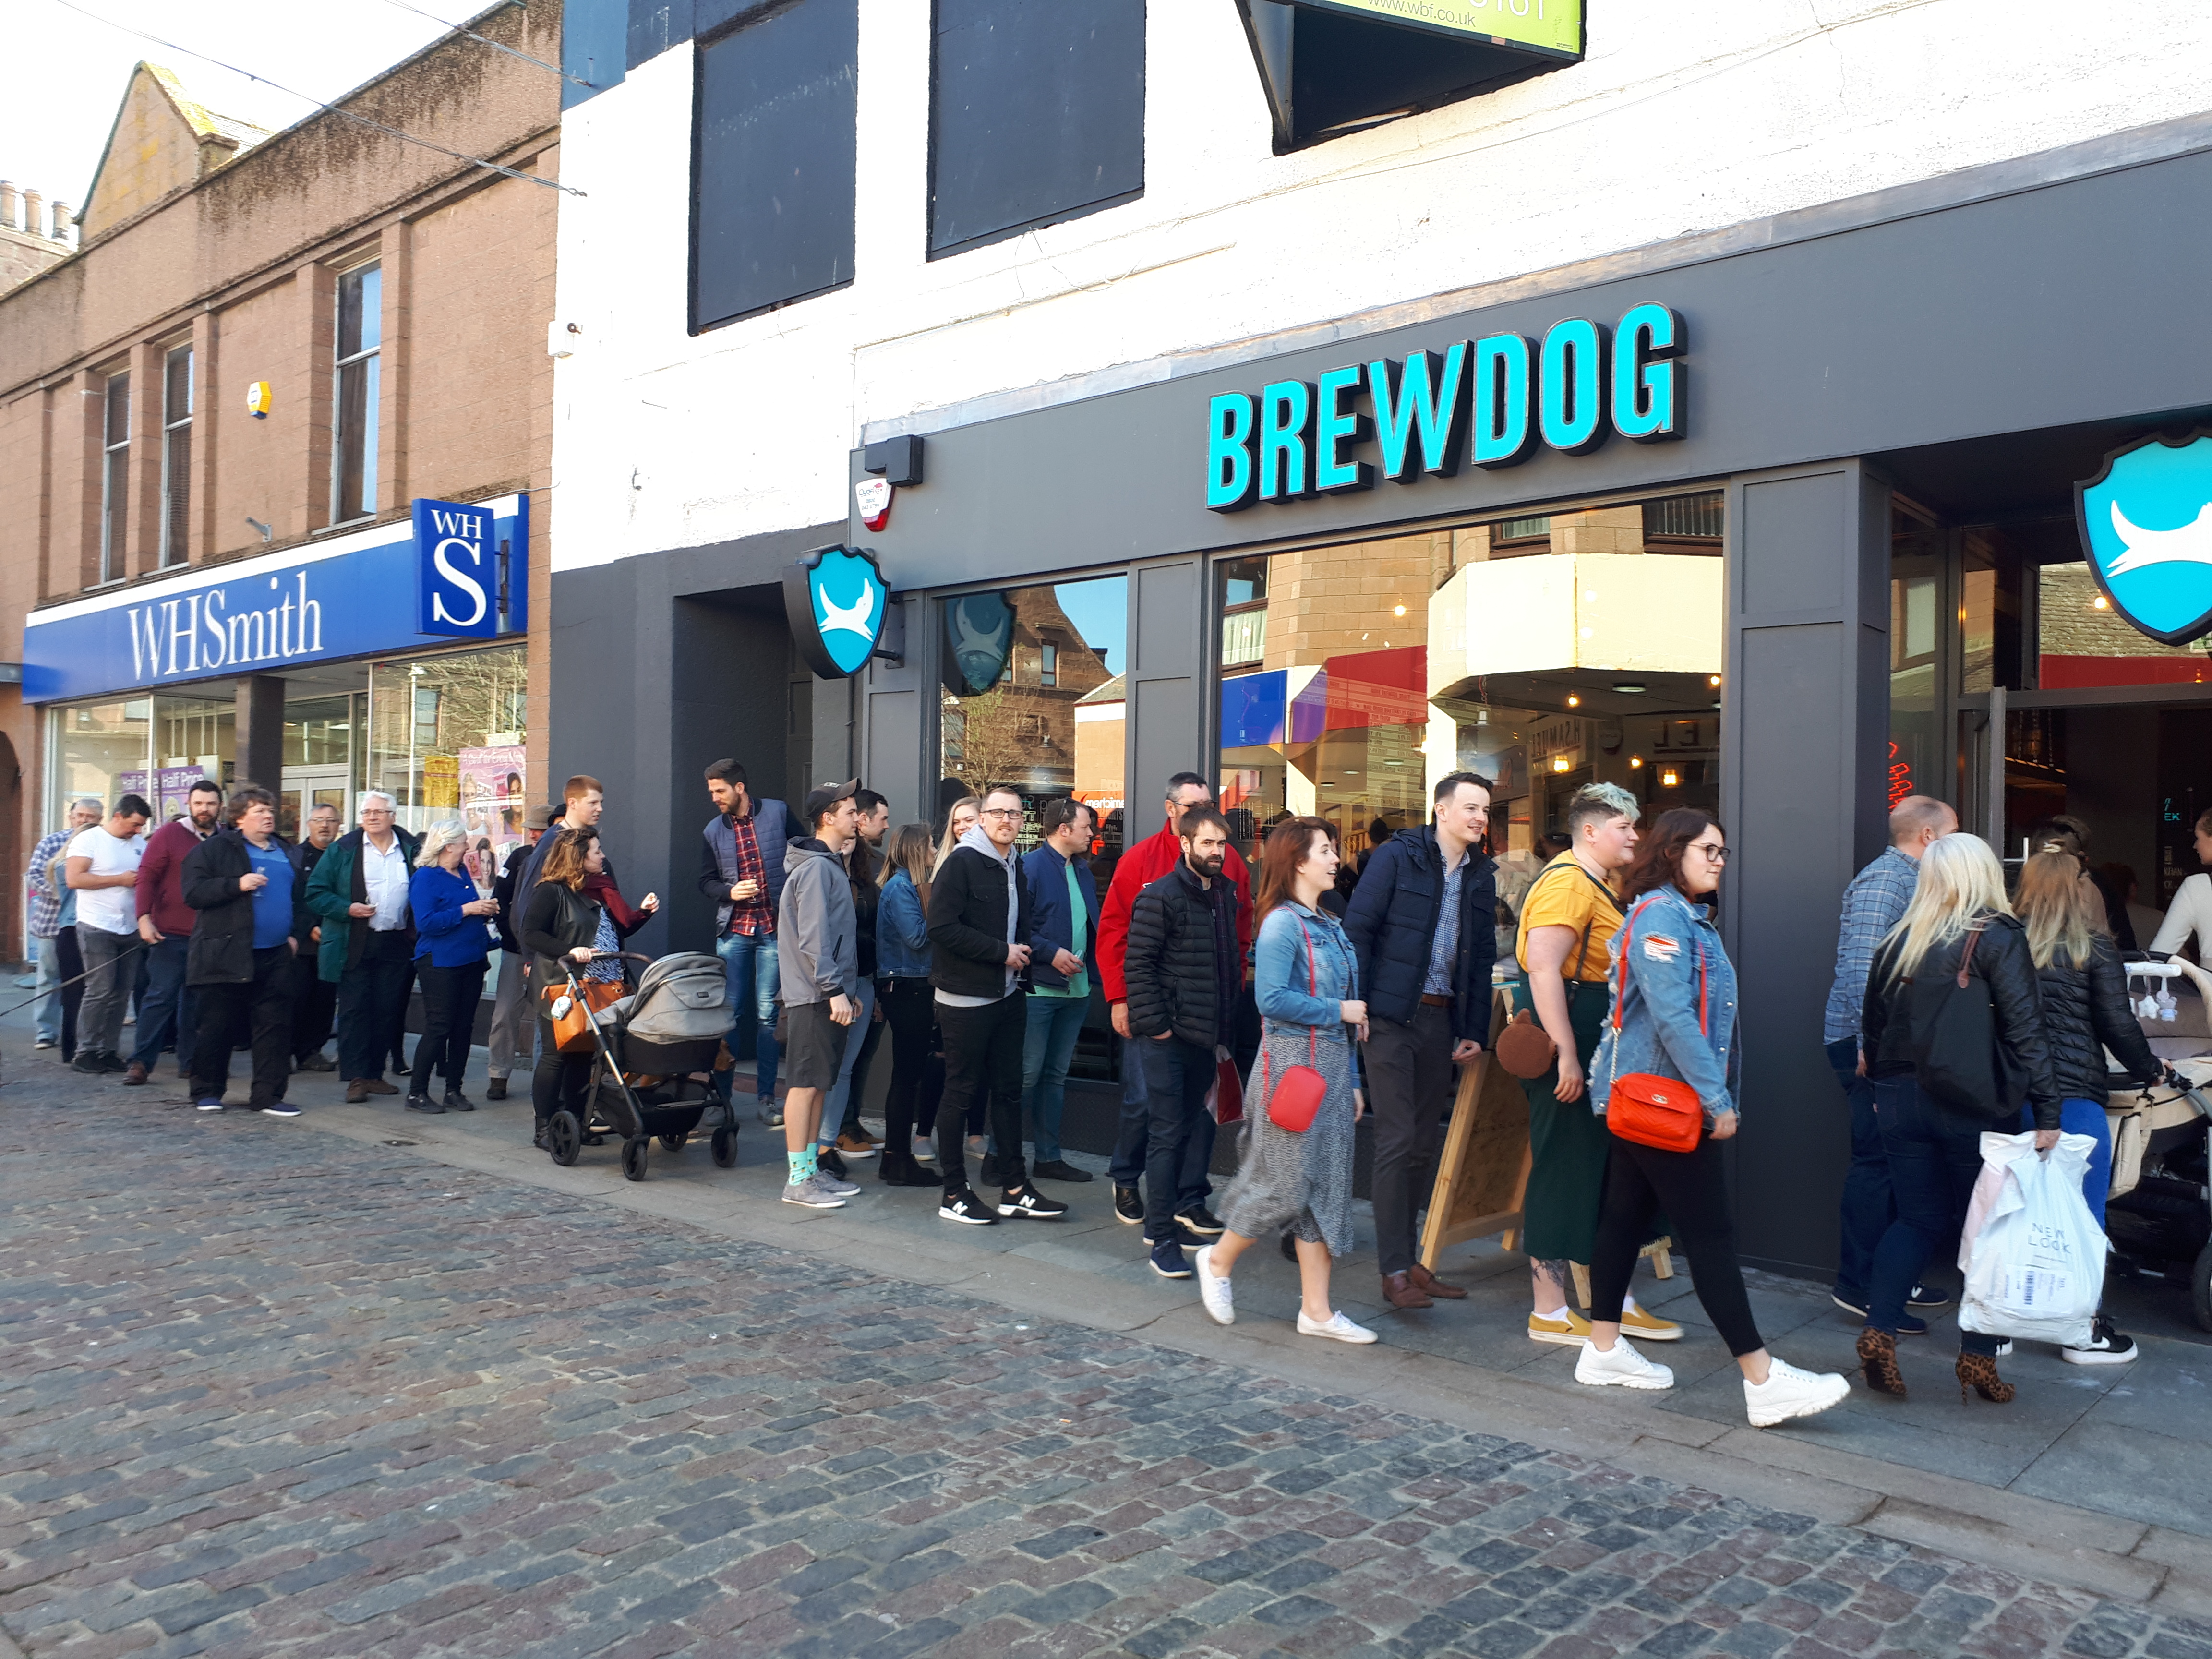 Eager locals and visitors queuing to be the first customers welcomed into BrewDog which is hoped will boost the town